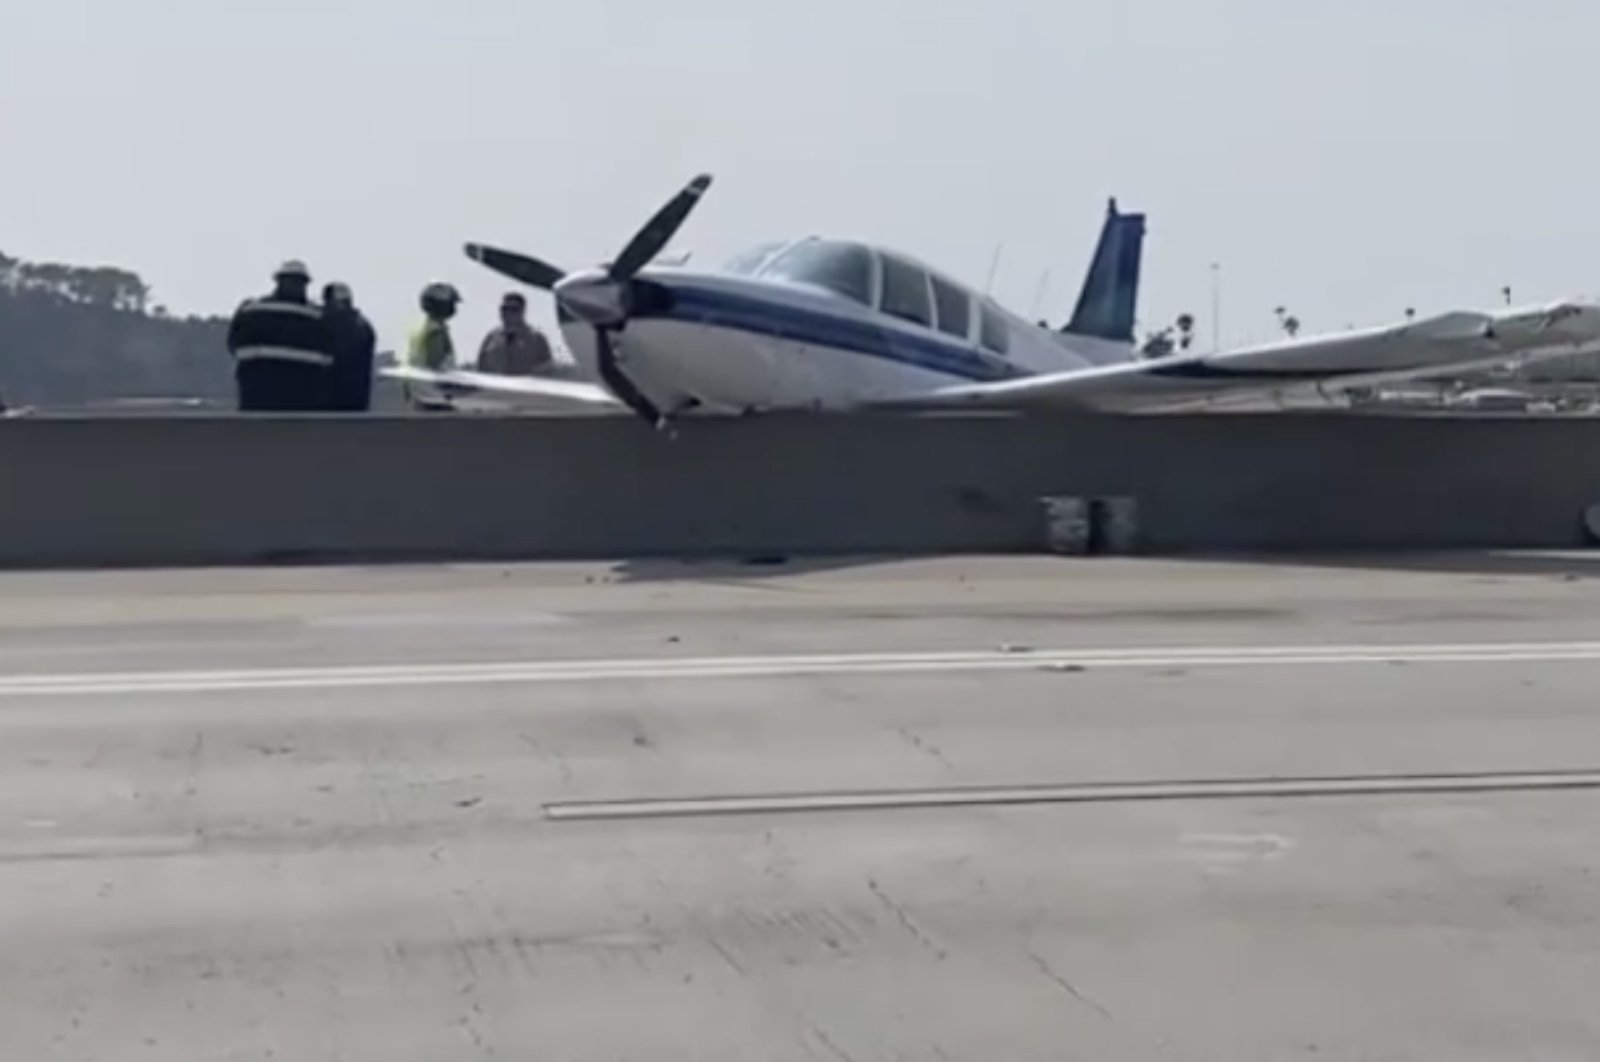 This still image shows a plane after it made an emergency landing at Interstate 5 highway, near San Diego, California, U.S., Aug. 25, 2021.